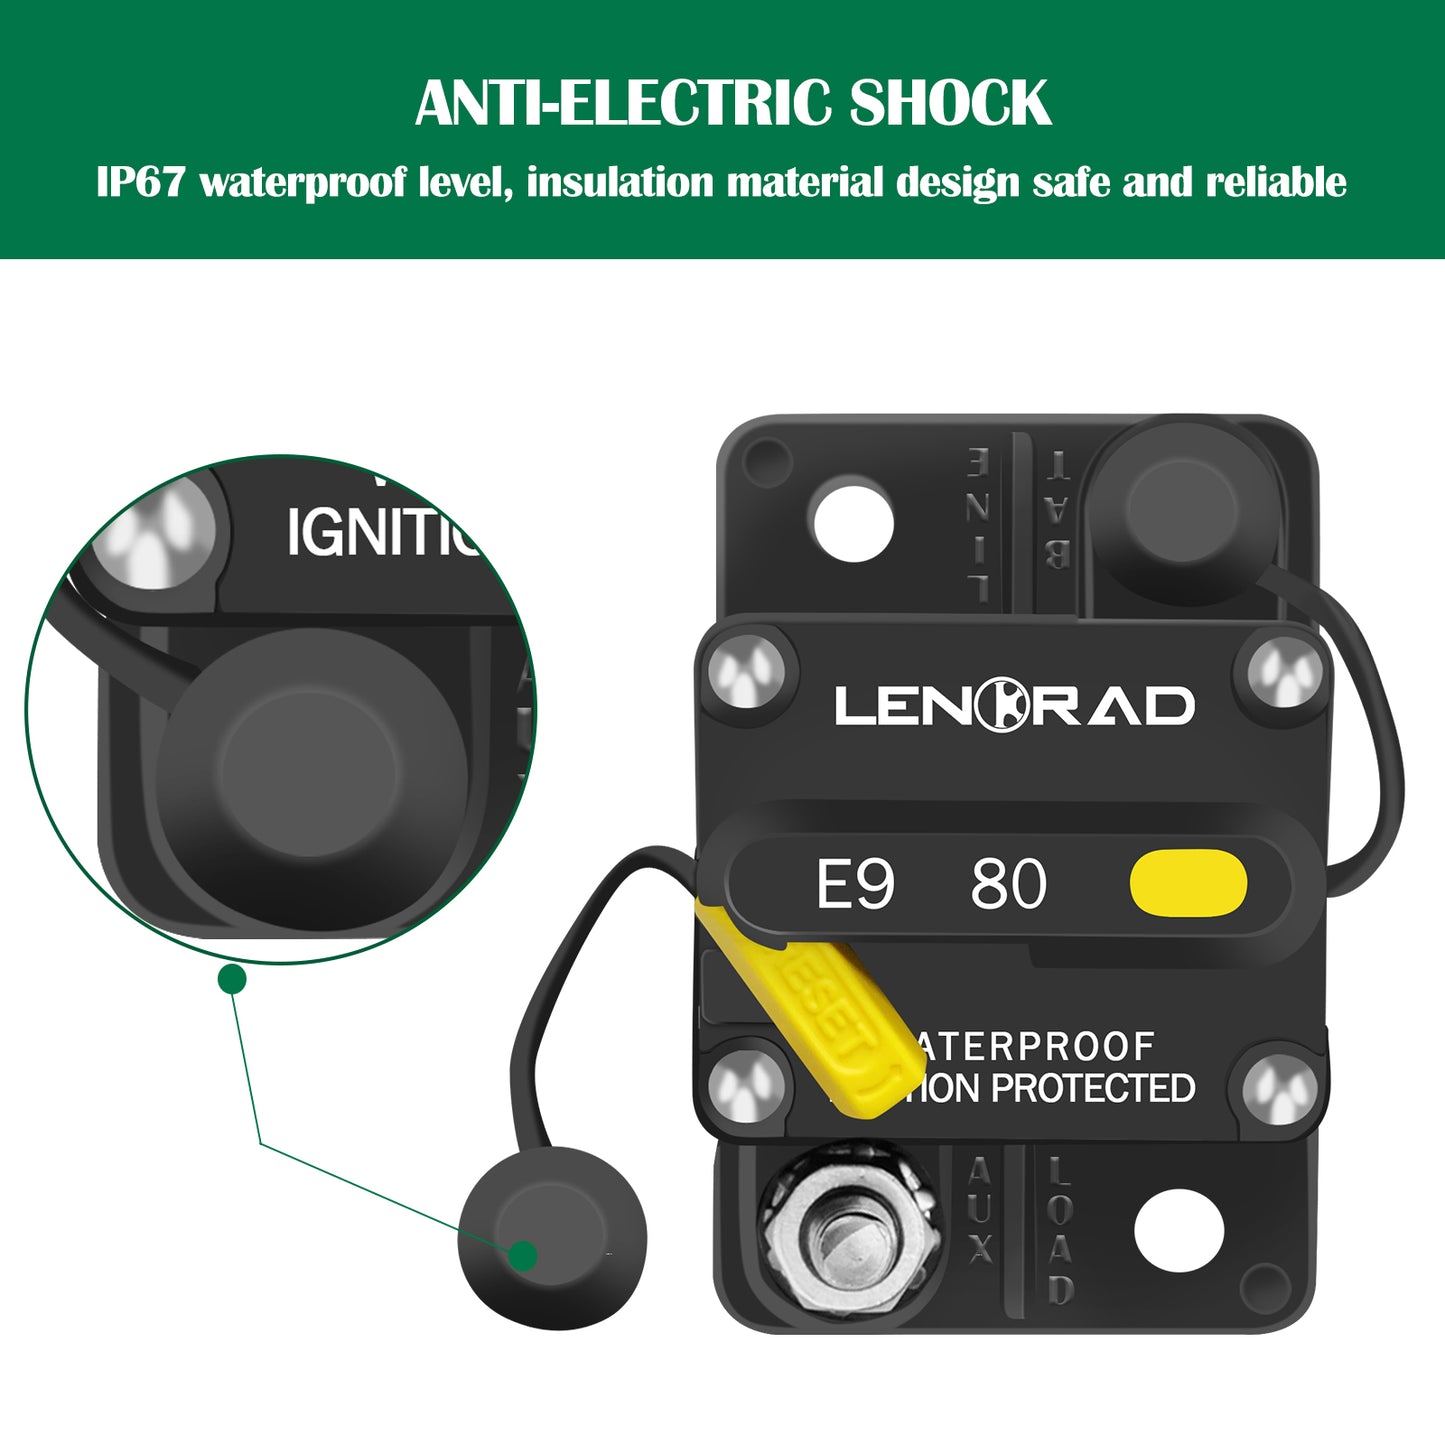 LENKRAD 80 Amp Circuit Breaker 12V with Manual Reset Switch Button for Boat Marine RV Yacht, Boat Circuit Breakers 12V - 48V DC, Waterproof(Surface Mount) - THALASSA